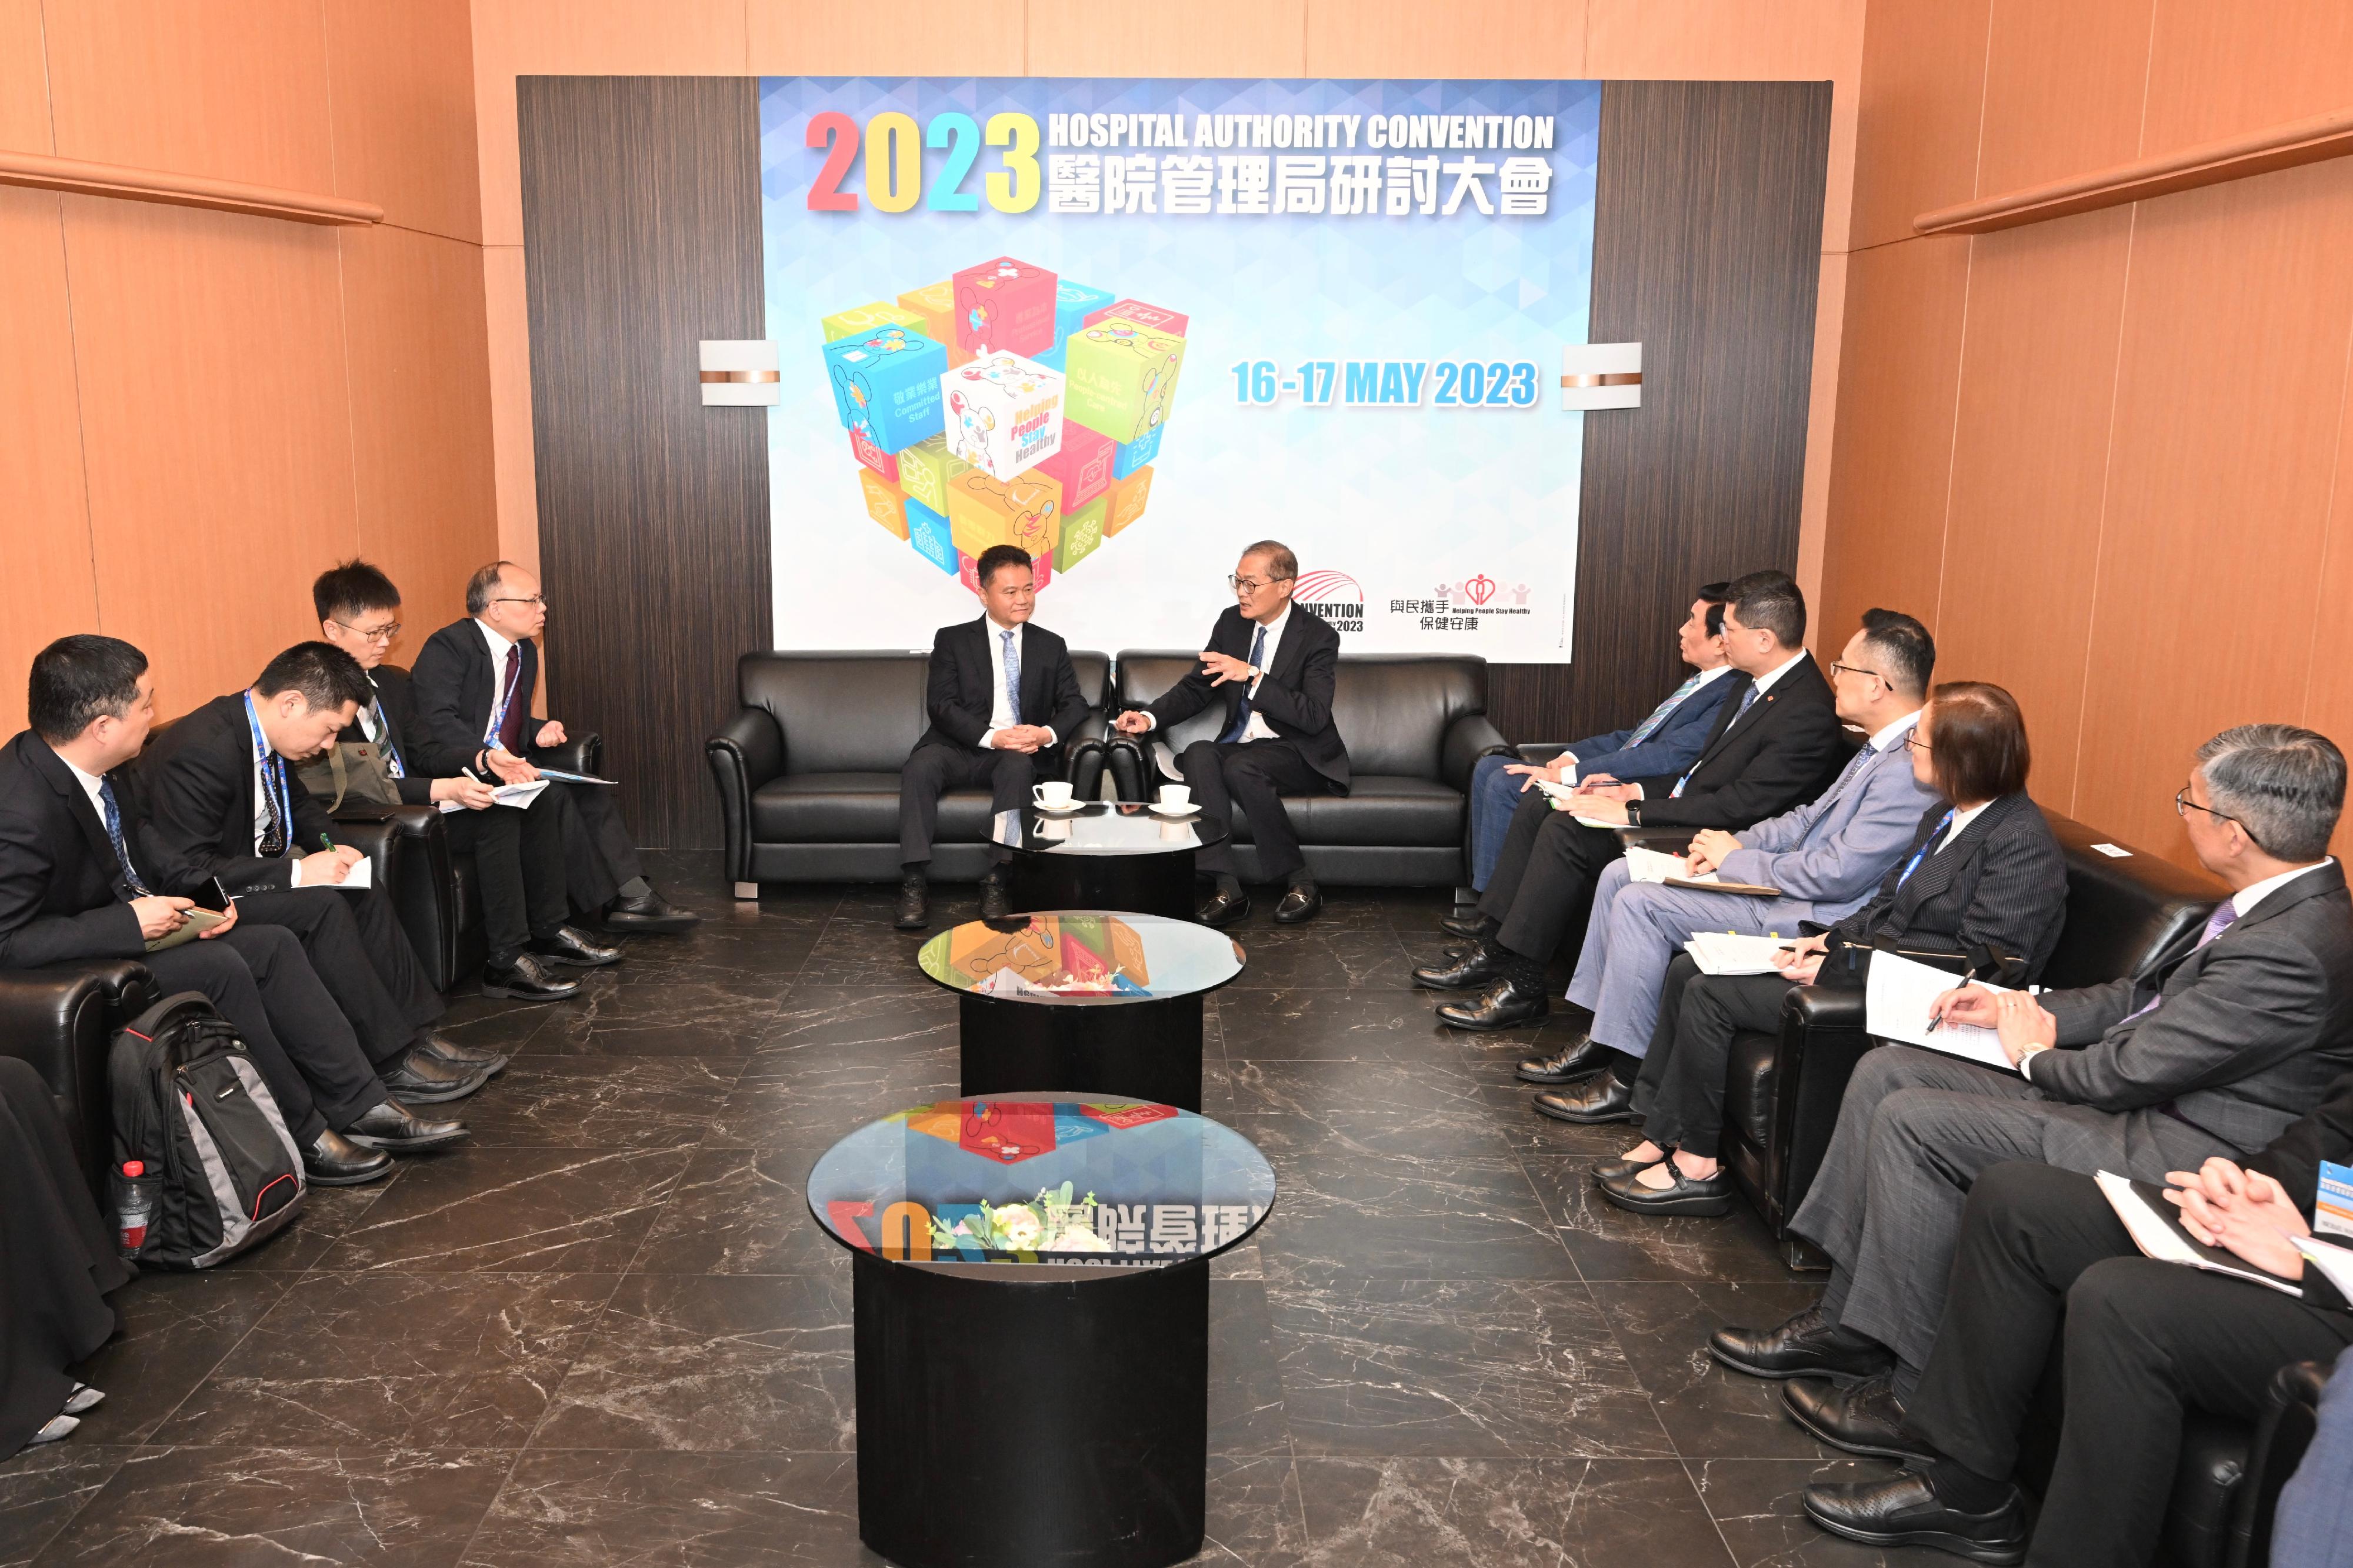 The Secretary for Health, Professor Lo Chung-mau (sixth right), meets the Party Secretary and Director of the Health Commission of Guangdong Province, Mr Zhu Hong (fifth left), and his delegation at the Hospital Authority Convention 2023 today (May 16) to discuss room for development and co-operation in the healthcare aspect between Hong Kong and Guangdong Province.
